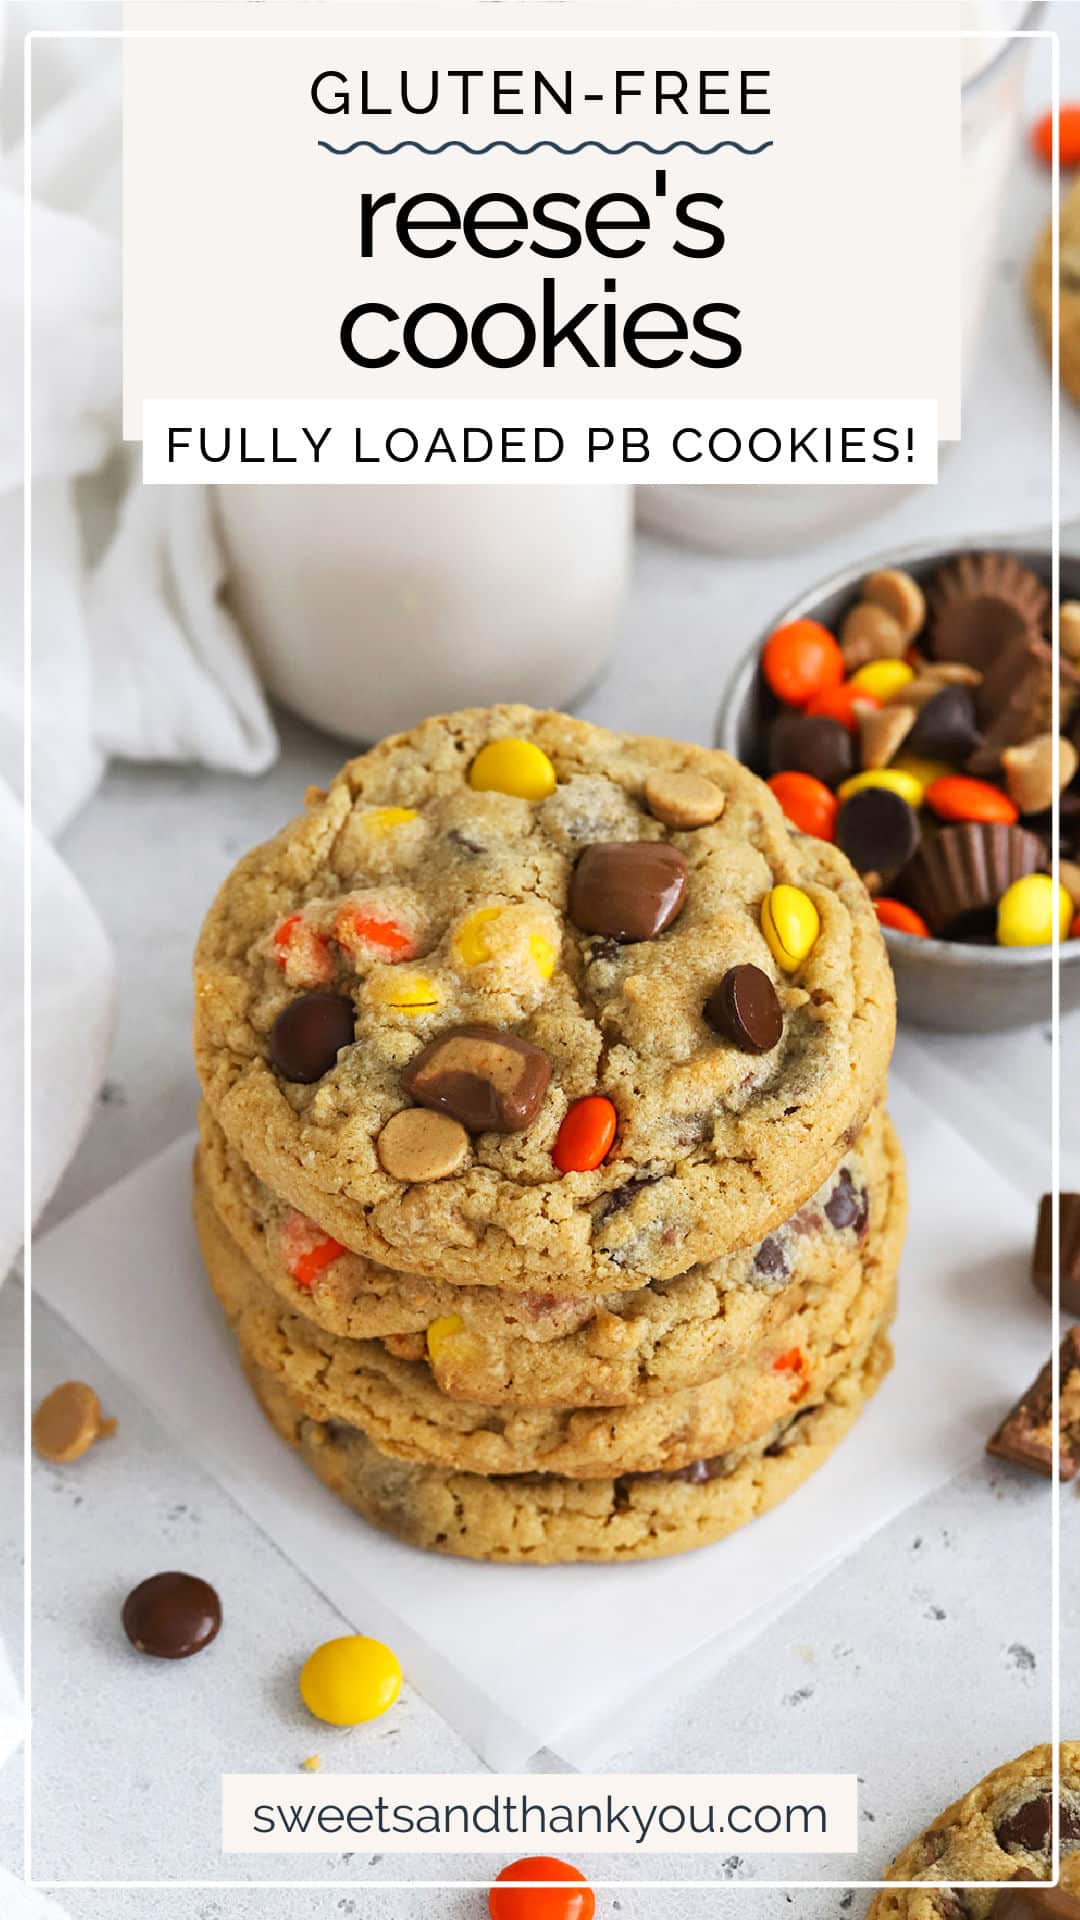 Gluten-Free Reese's Cookies -  These gluten-free peanut butter cookies are fully loaded with Reese's cups, Reese's pieces, peanut butter chips AND chocolate chips! The ultimate cookie for peanut butter lovers! / gluten free Reese's peanut butter cookies / gluten-free Reeses peanut butter chocolate chip cookies // gluten-free chocolate peanut butter cookies // gluten-free Reese's pieces cookies /